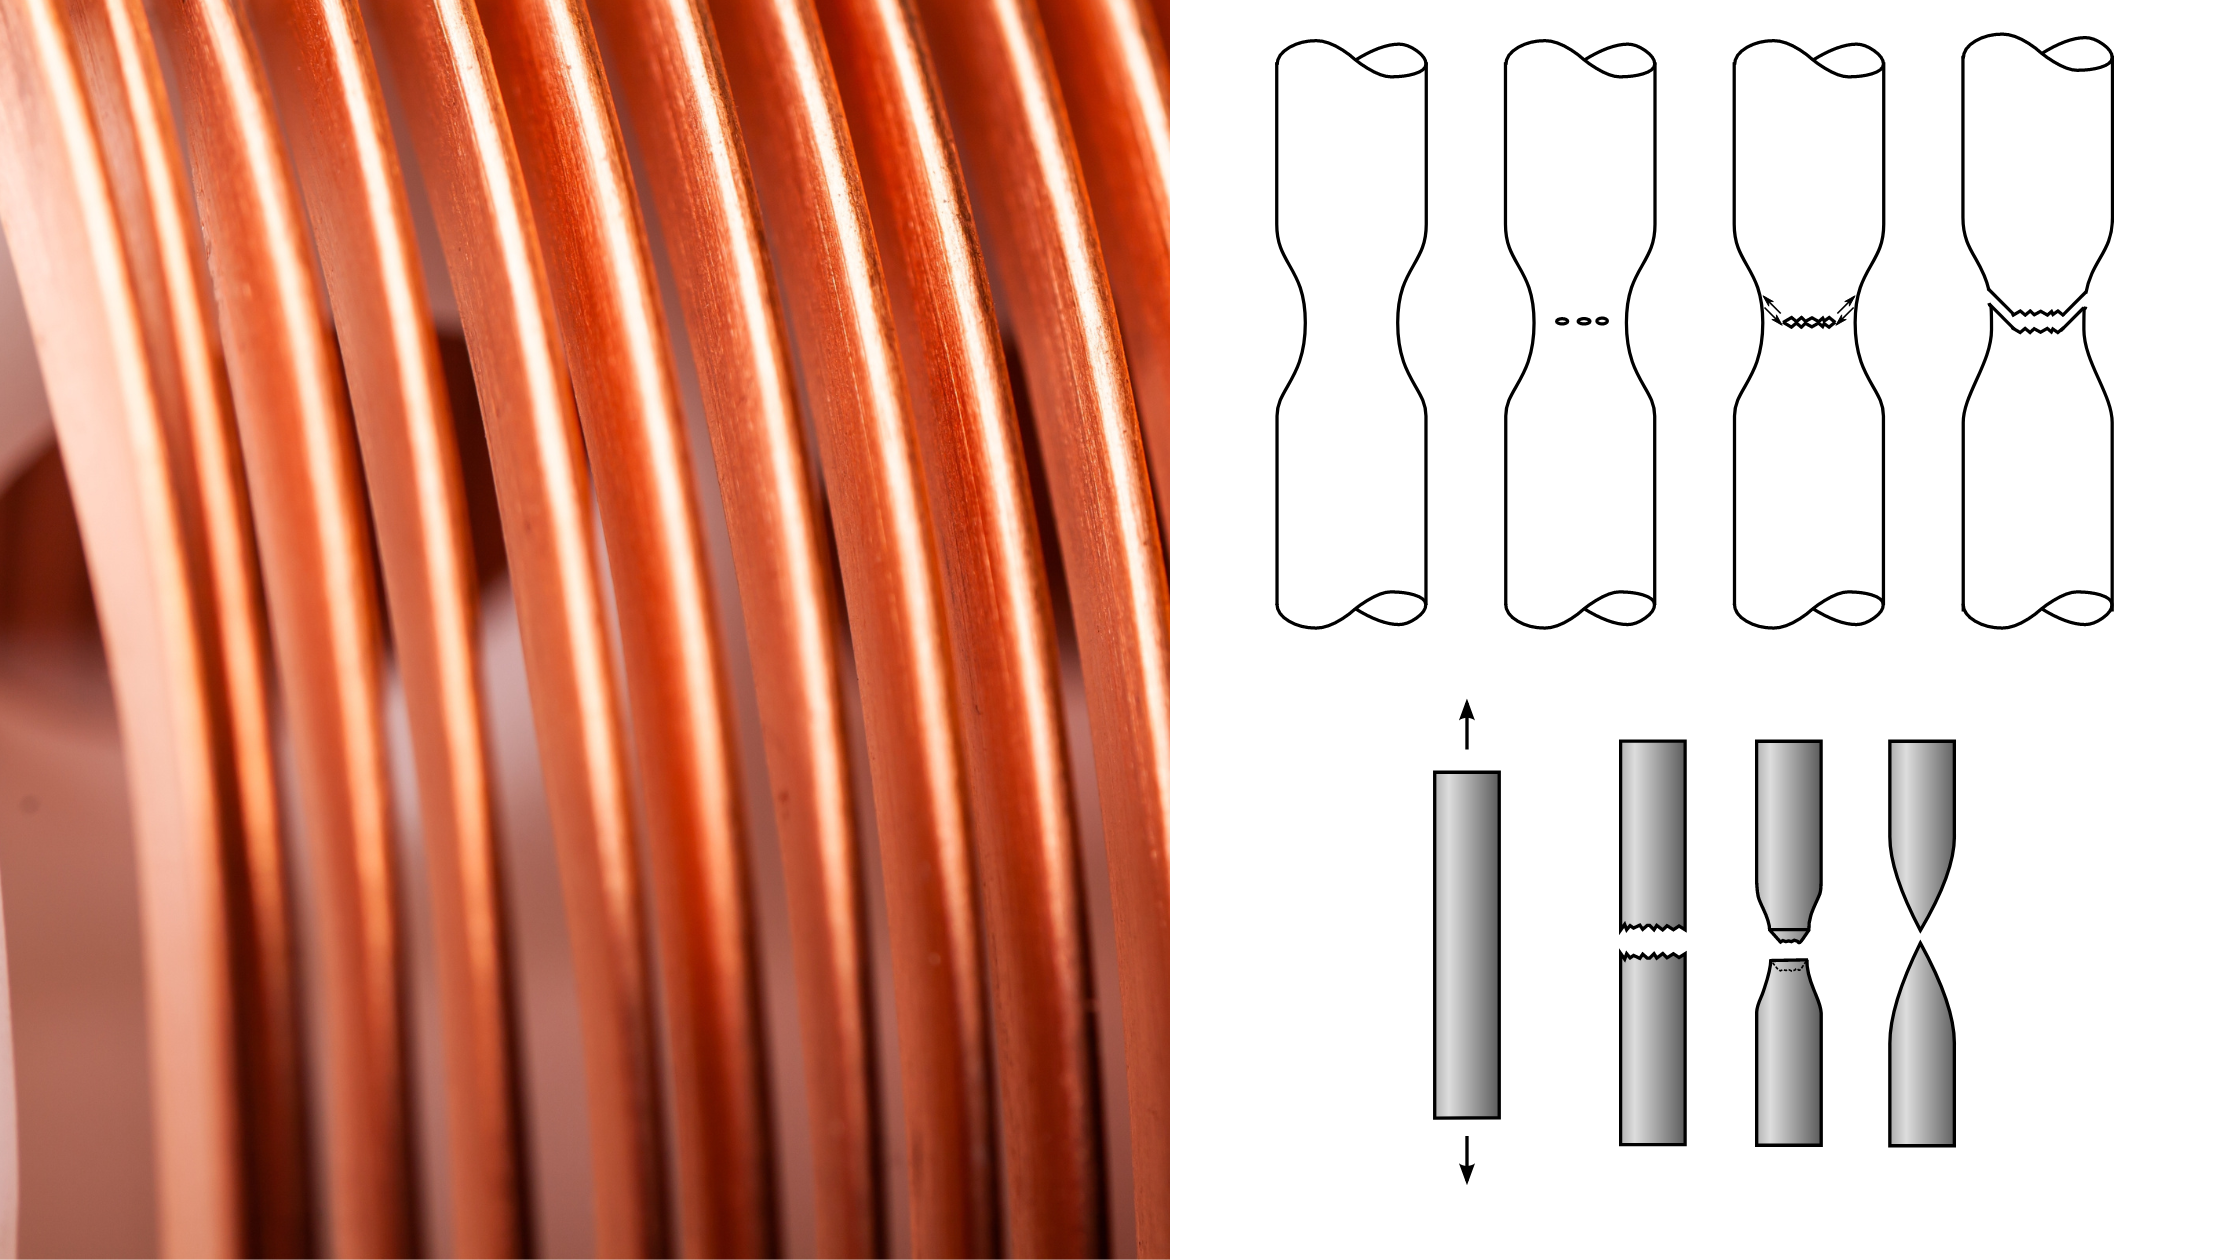 Copper extruded wire and a tensile test representing metal ductility